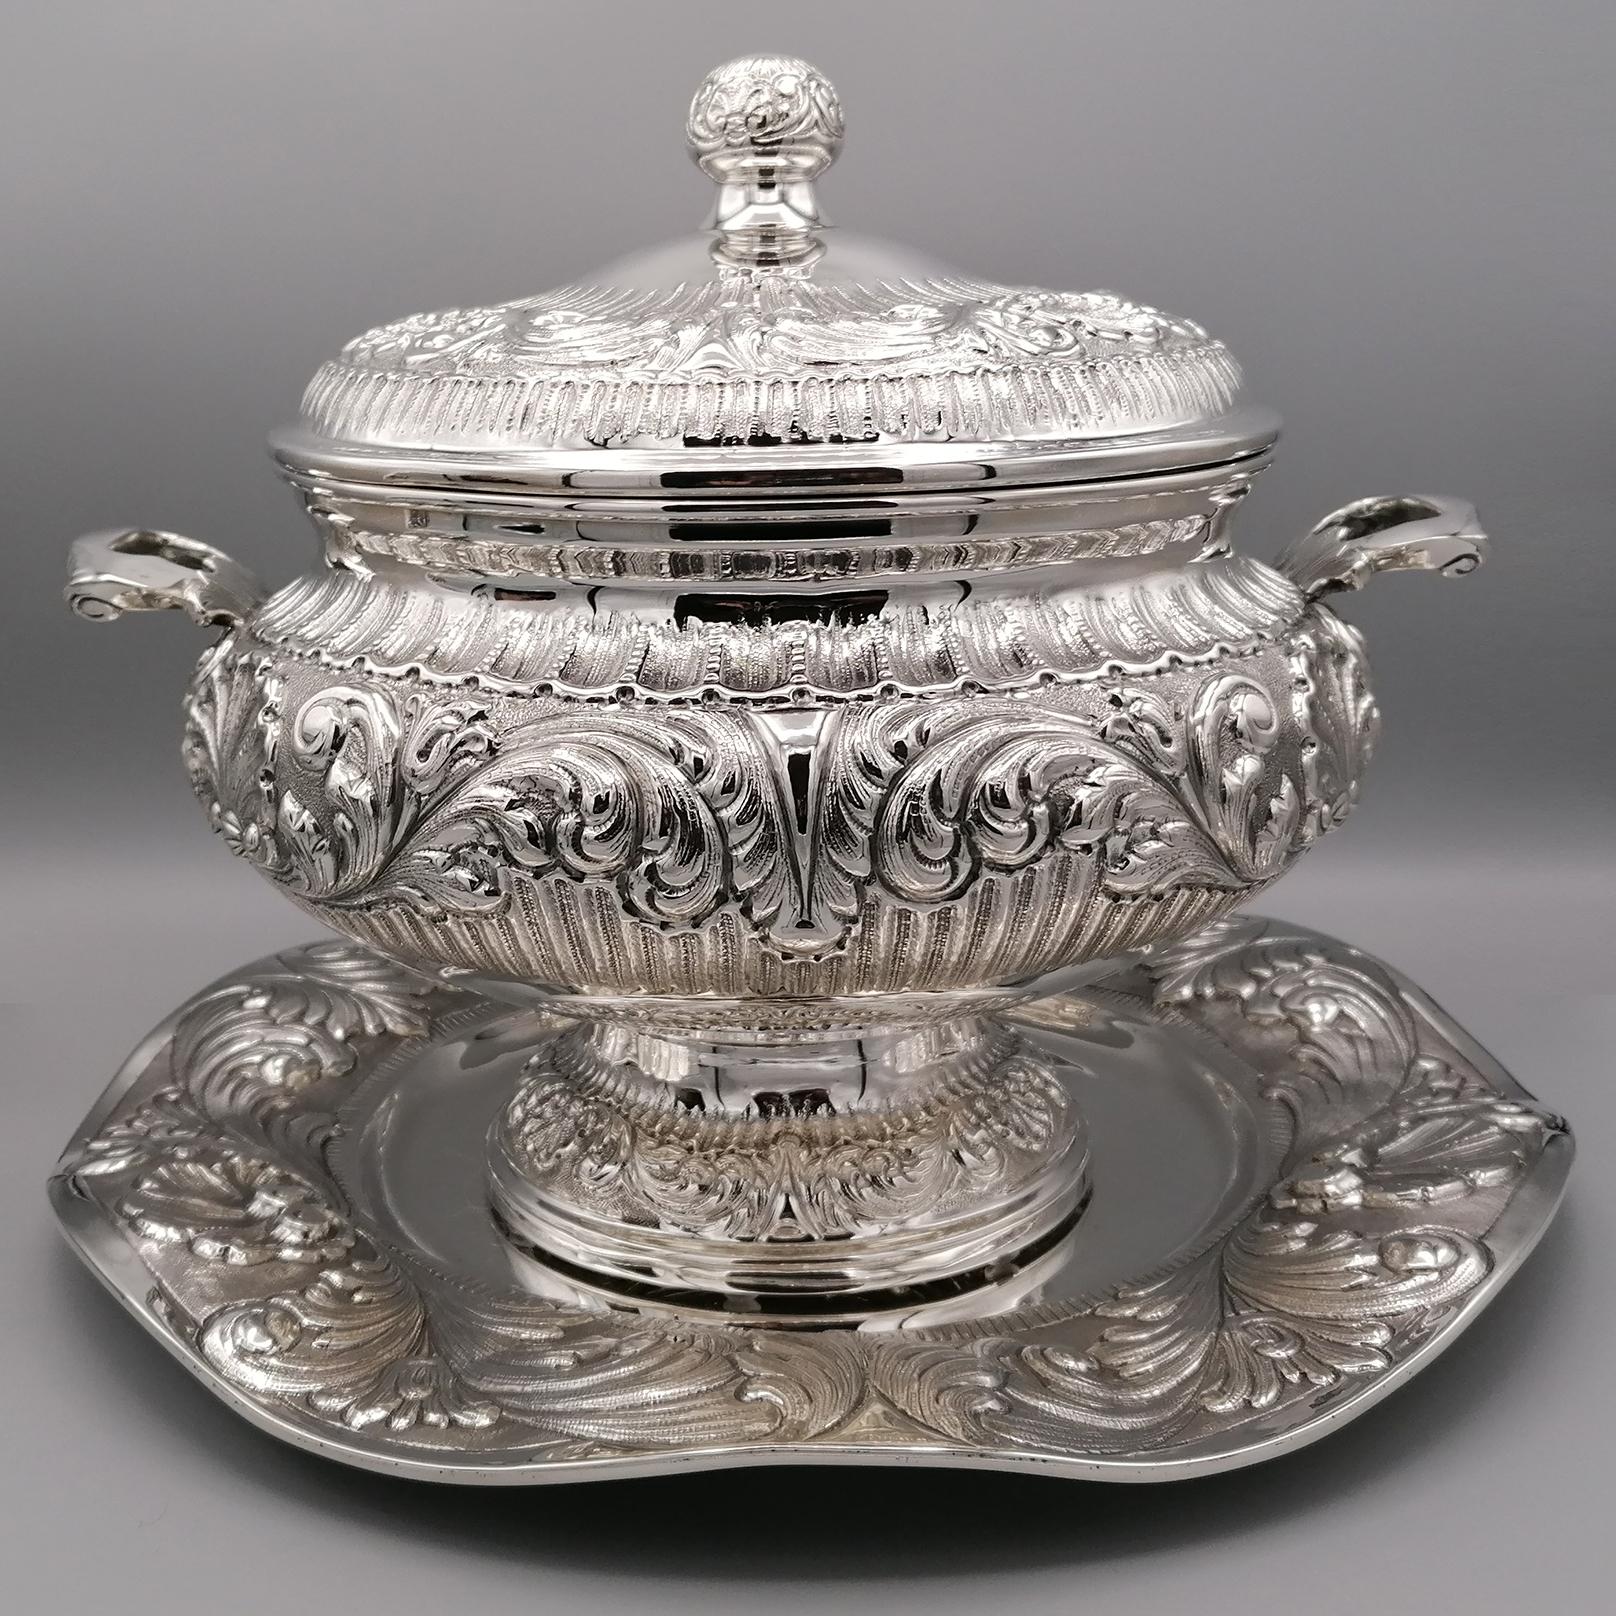 Sterling Silver Baroque style tureen with handles and base. The round shape is embellished with chisels,  typical of the Baroque style. The tureen is placed on a round waved plate which is also circular with the same chisel pattern.
2,405 grams
Dish